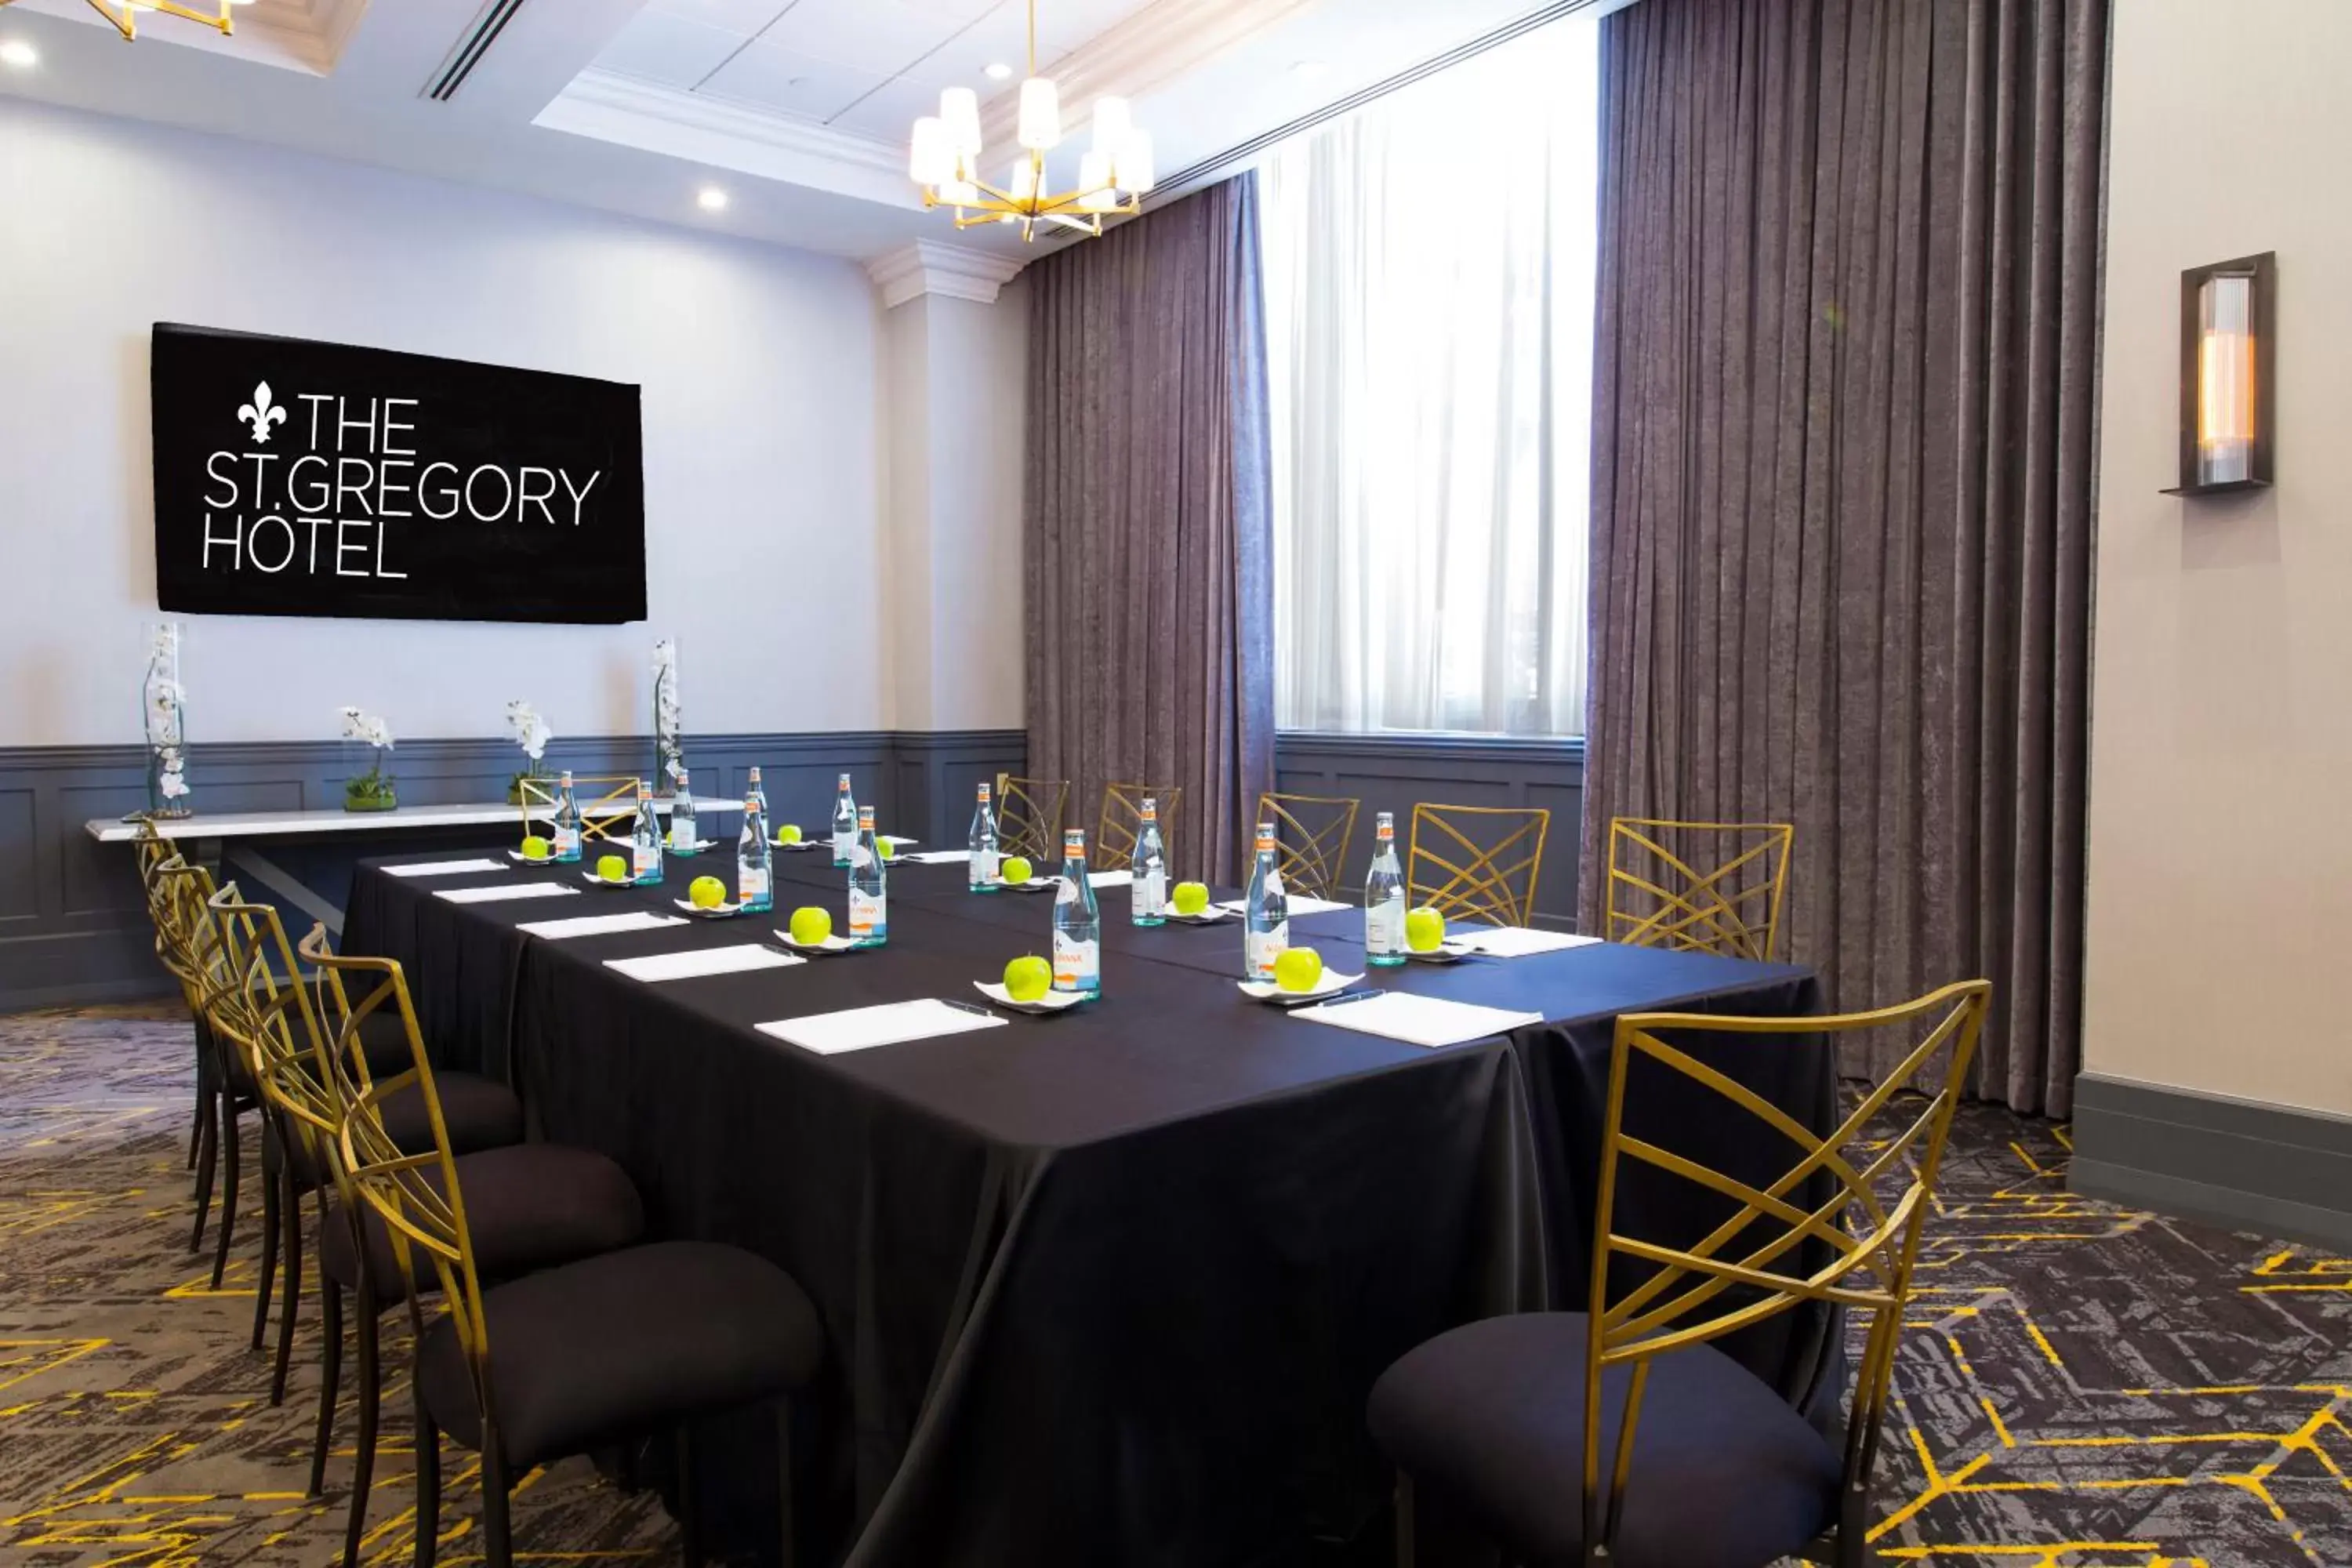 Meeting/conference room in The St Gregory Hotel Dupont Circle Georgetown